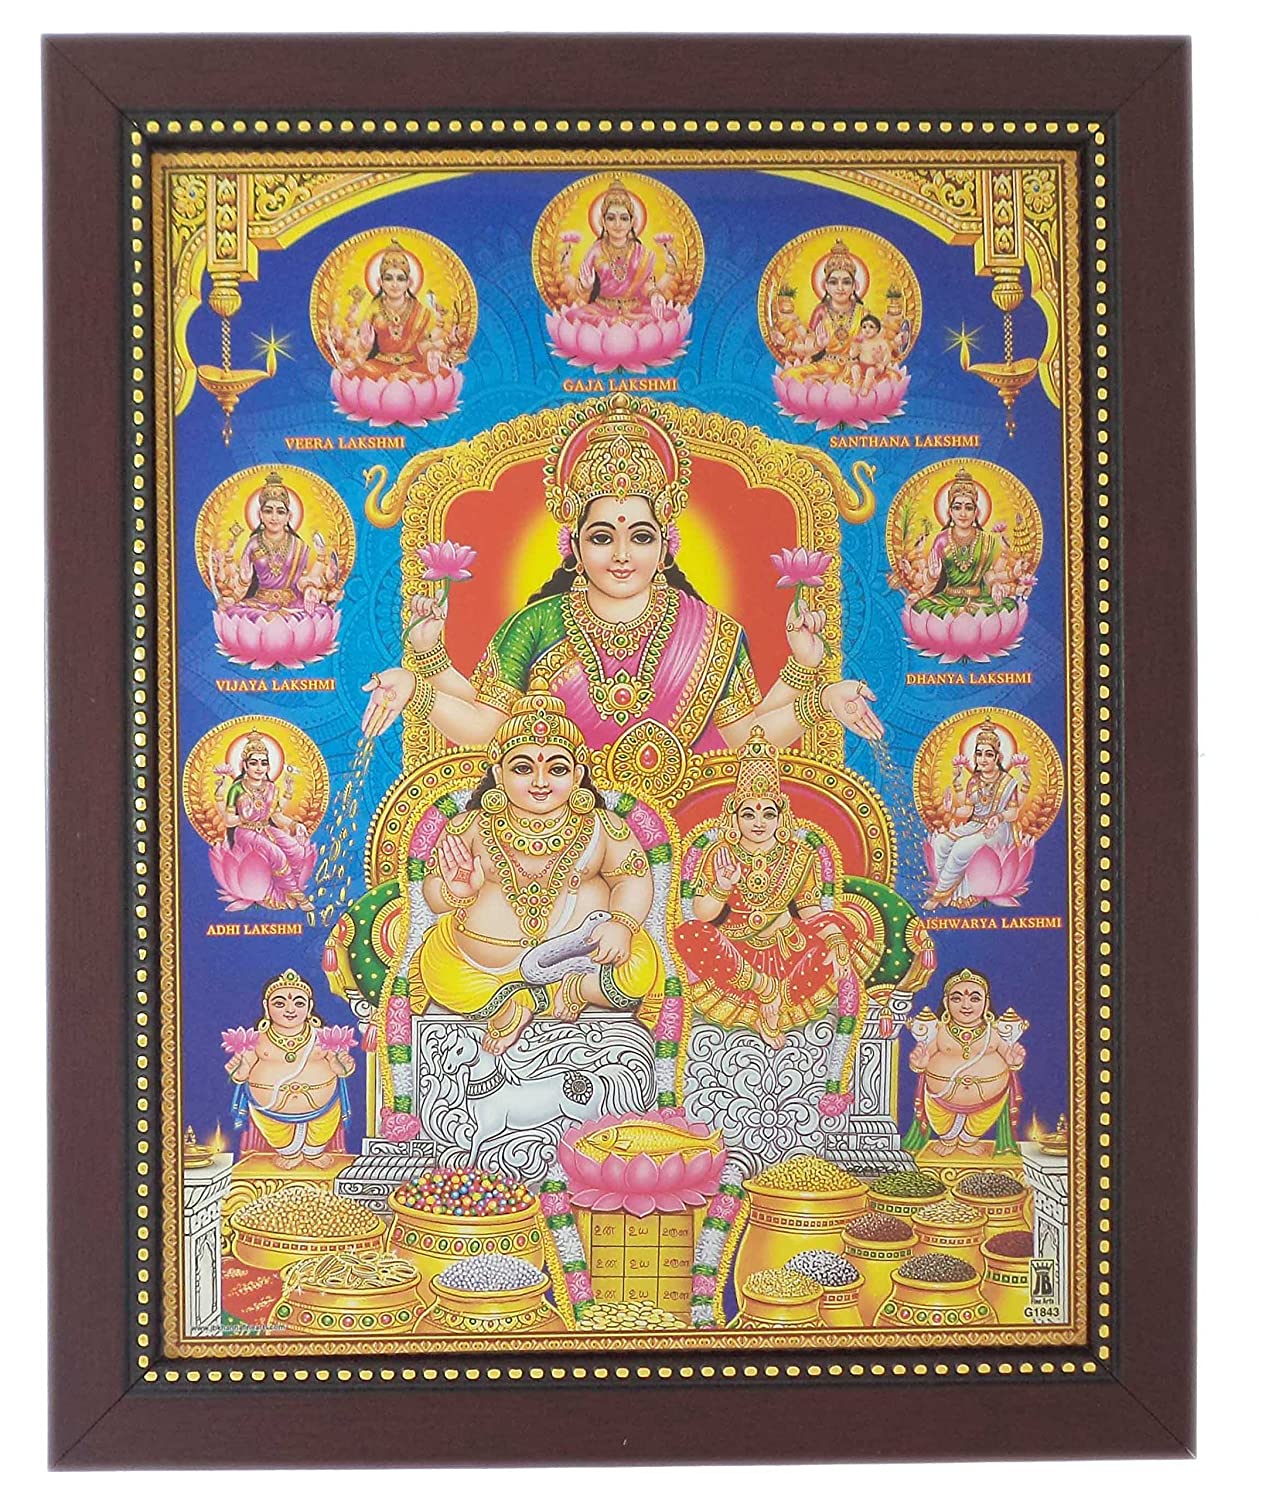 Buy Lord Kuber and Ashta Lakshmi Photo Frame ( 32.5 cm x 26.5 cm x 1.5 cm ) / Wall Hangings for Home Decor and Wall Decor / Photo Frames For Posters